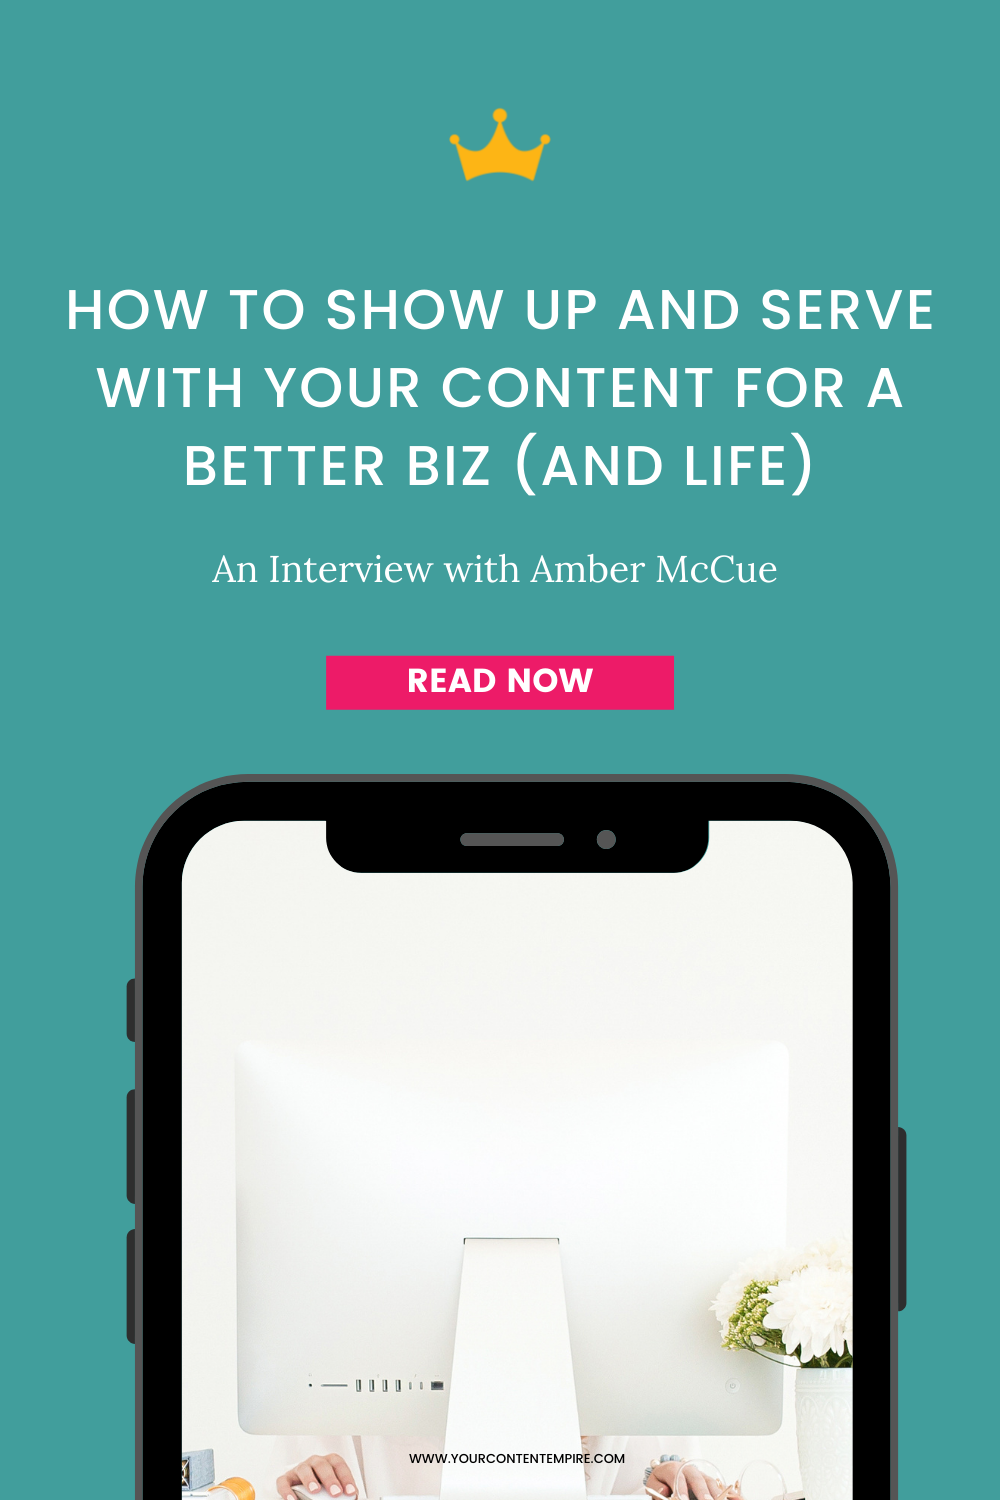 How to Show Up and Serve with Your Content for a Better Biz (And Life)